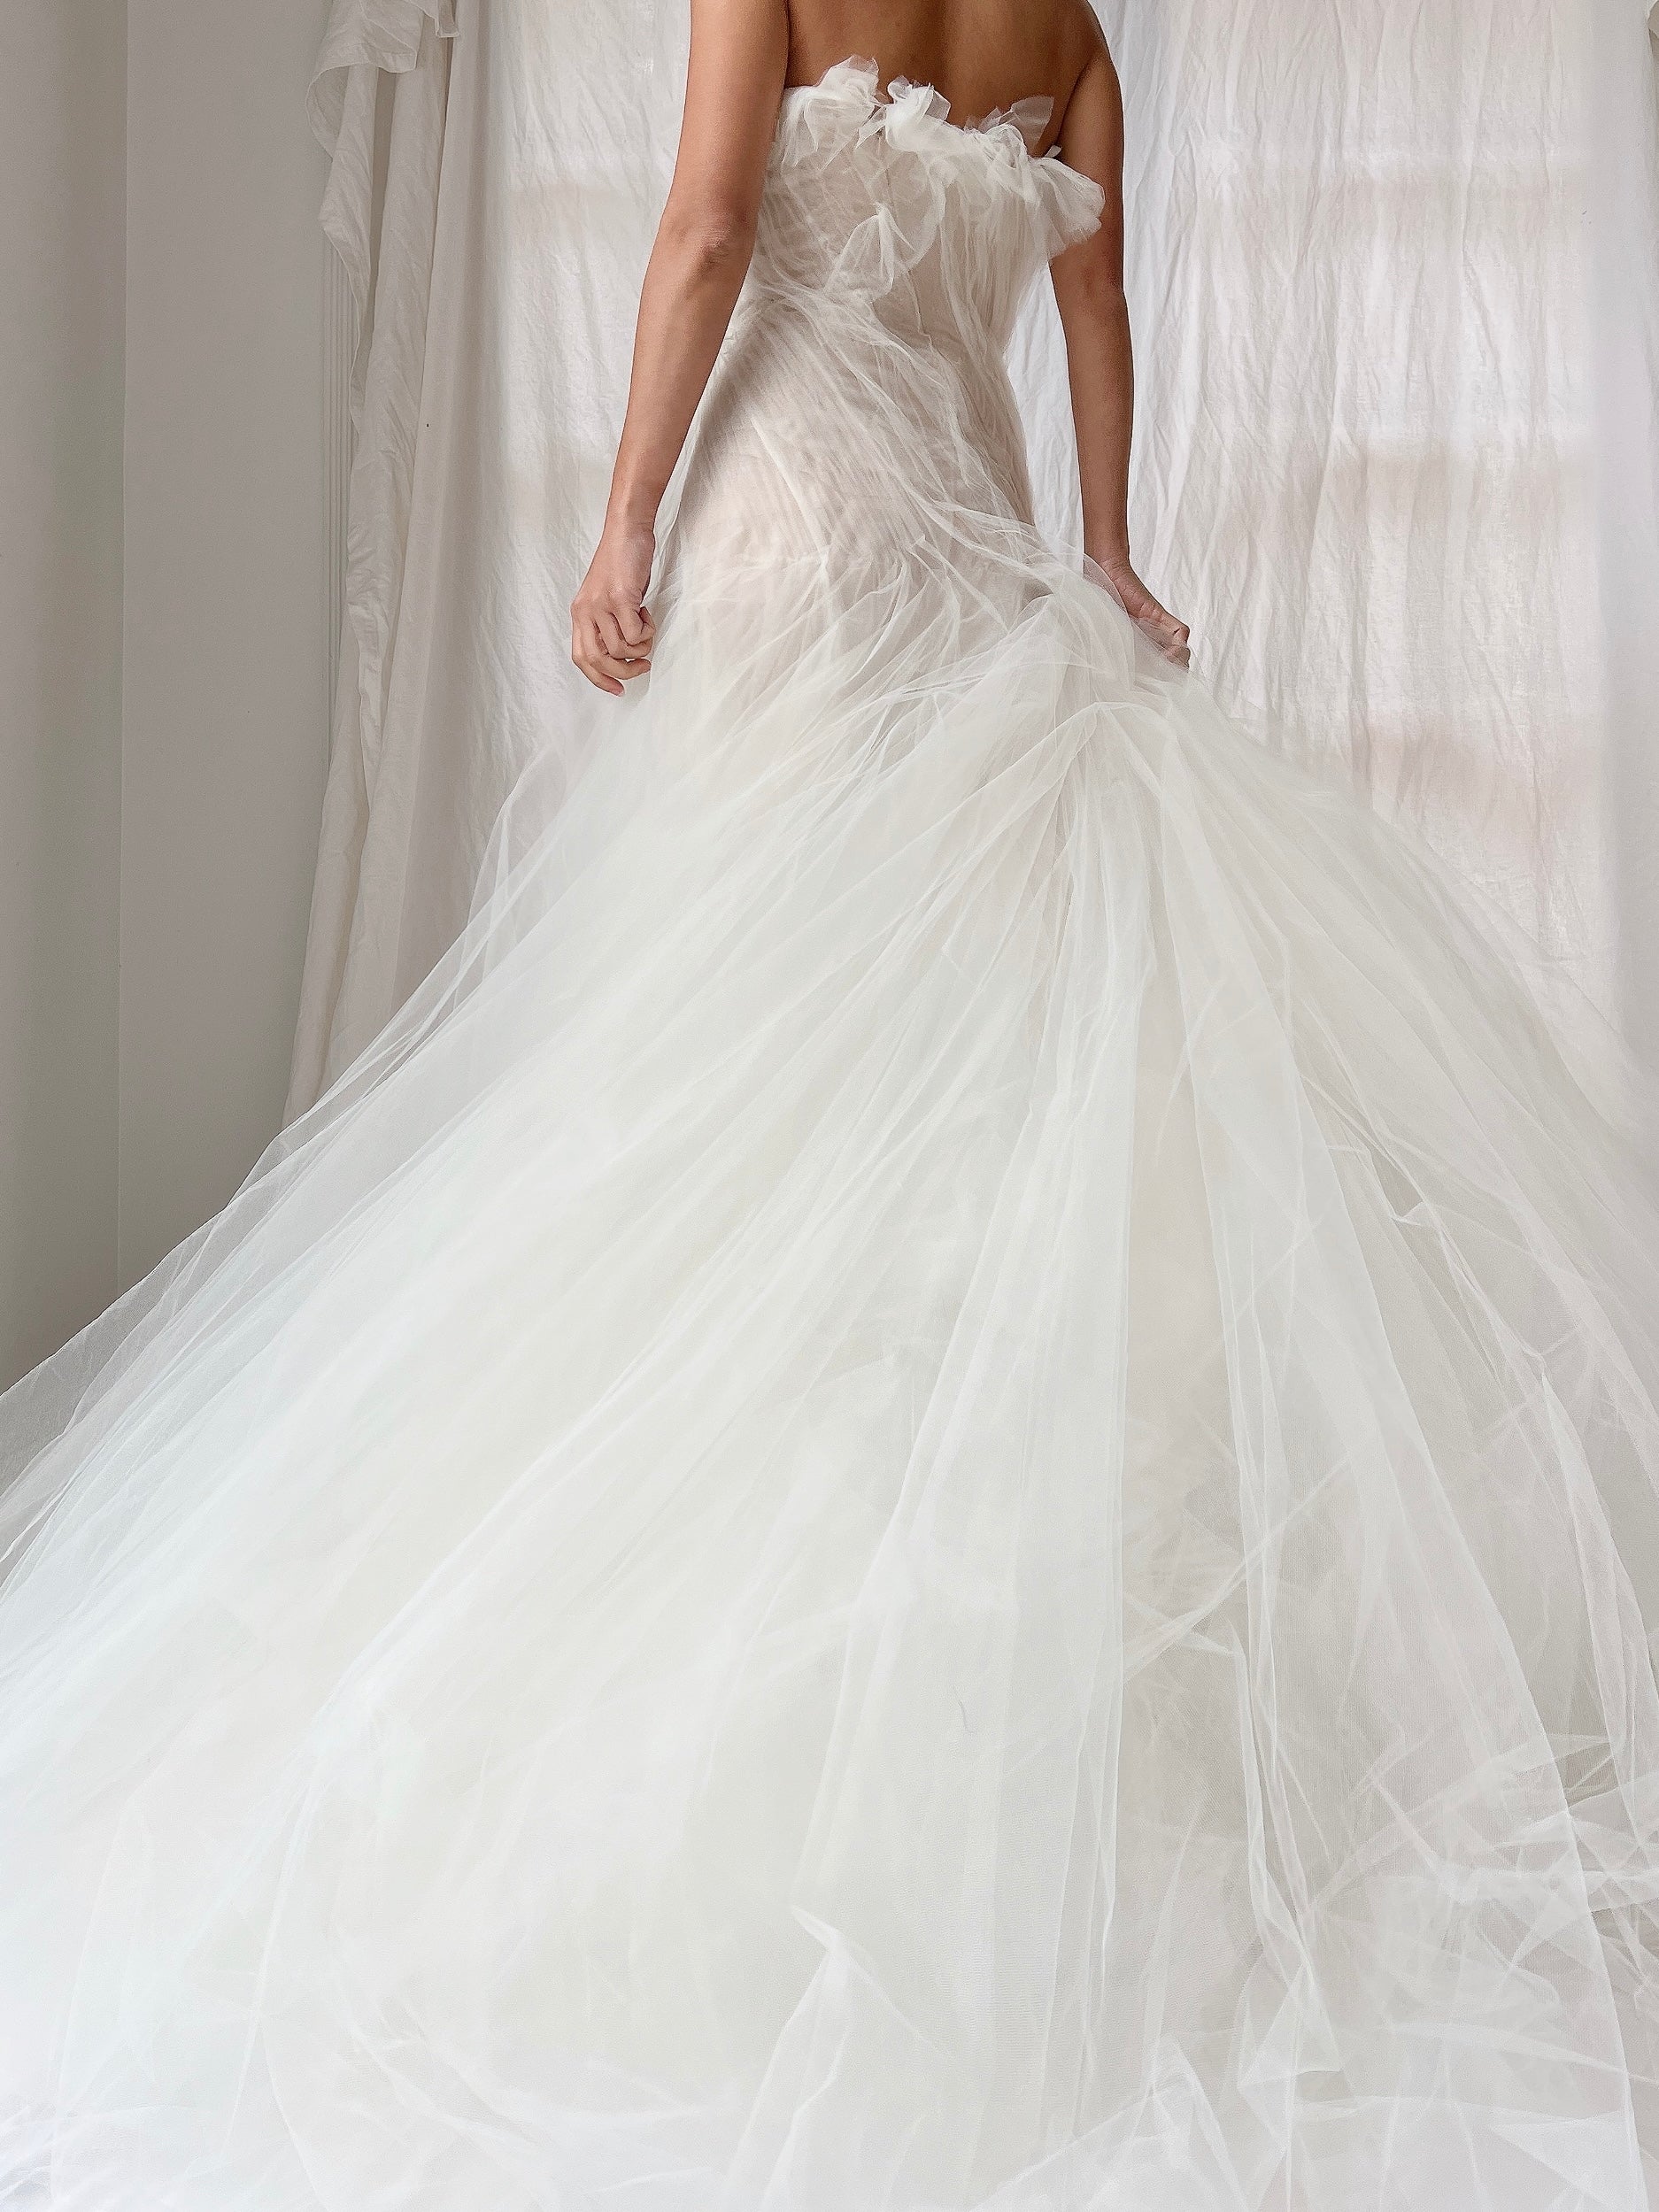 Vera Wang Tulle Gown - XS/0/2